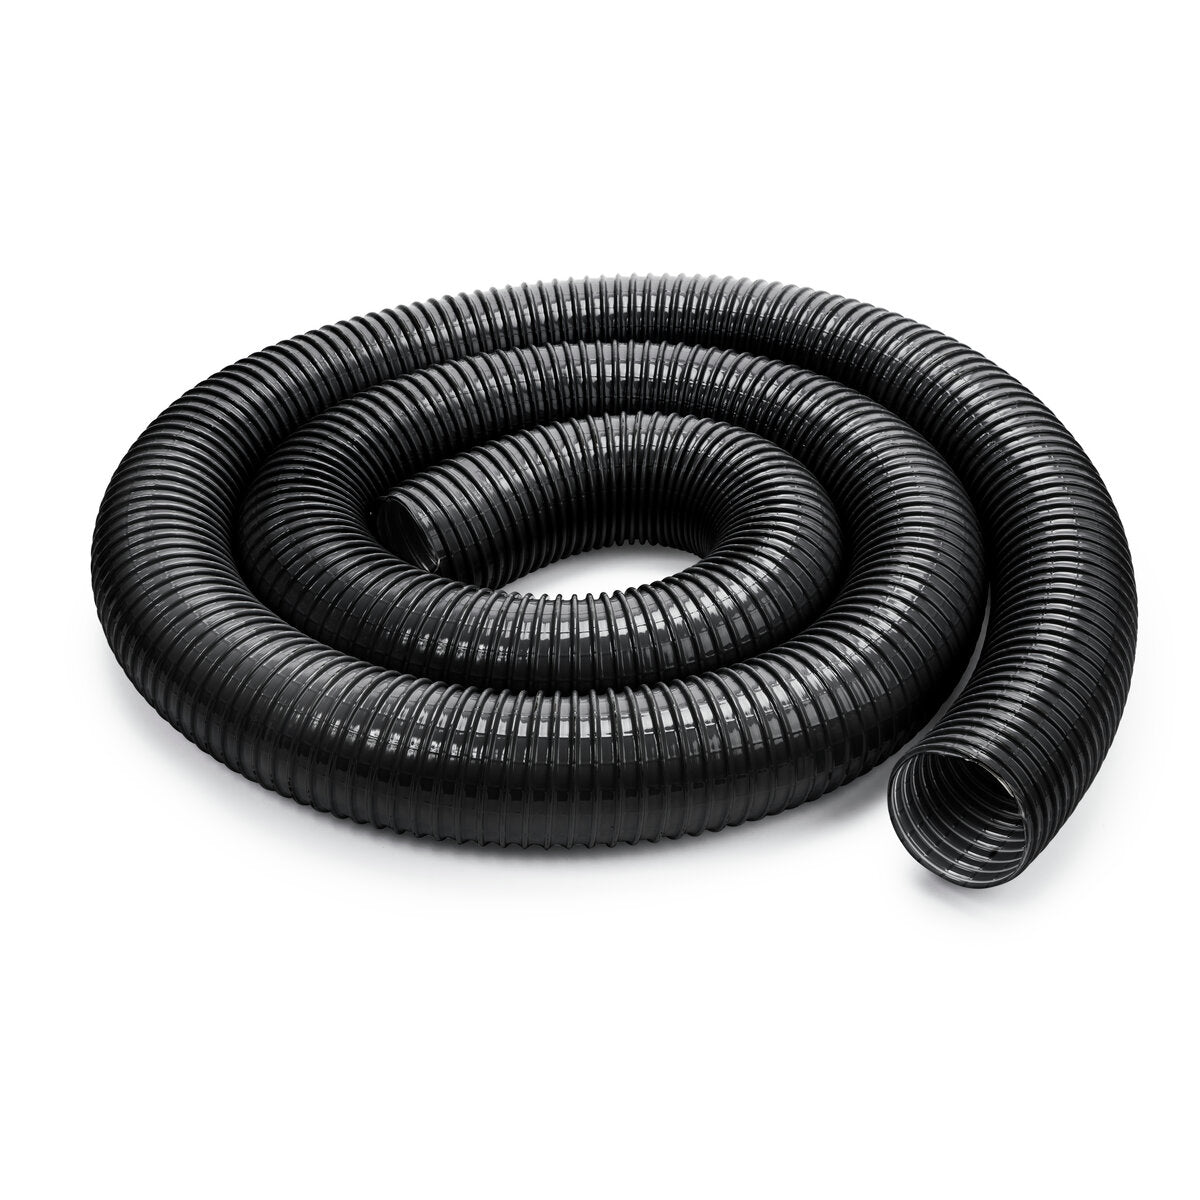 Lincoln Electric - Extraction Hose, 3 in. (76mm) Diameter (ID) x 25 ft. (7.6m) Length - K4114-25